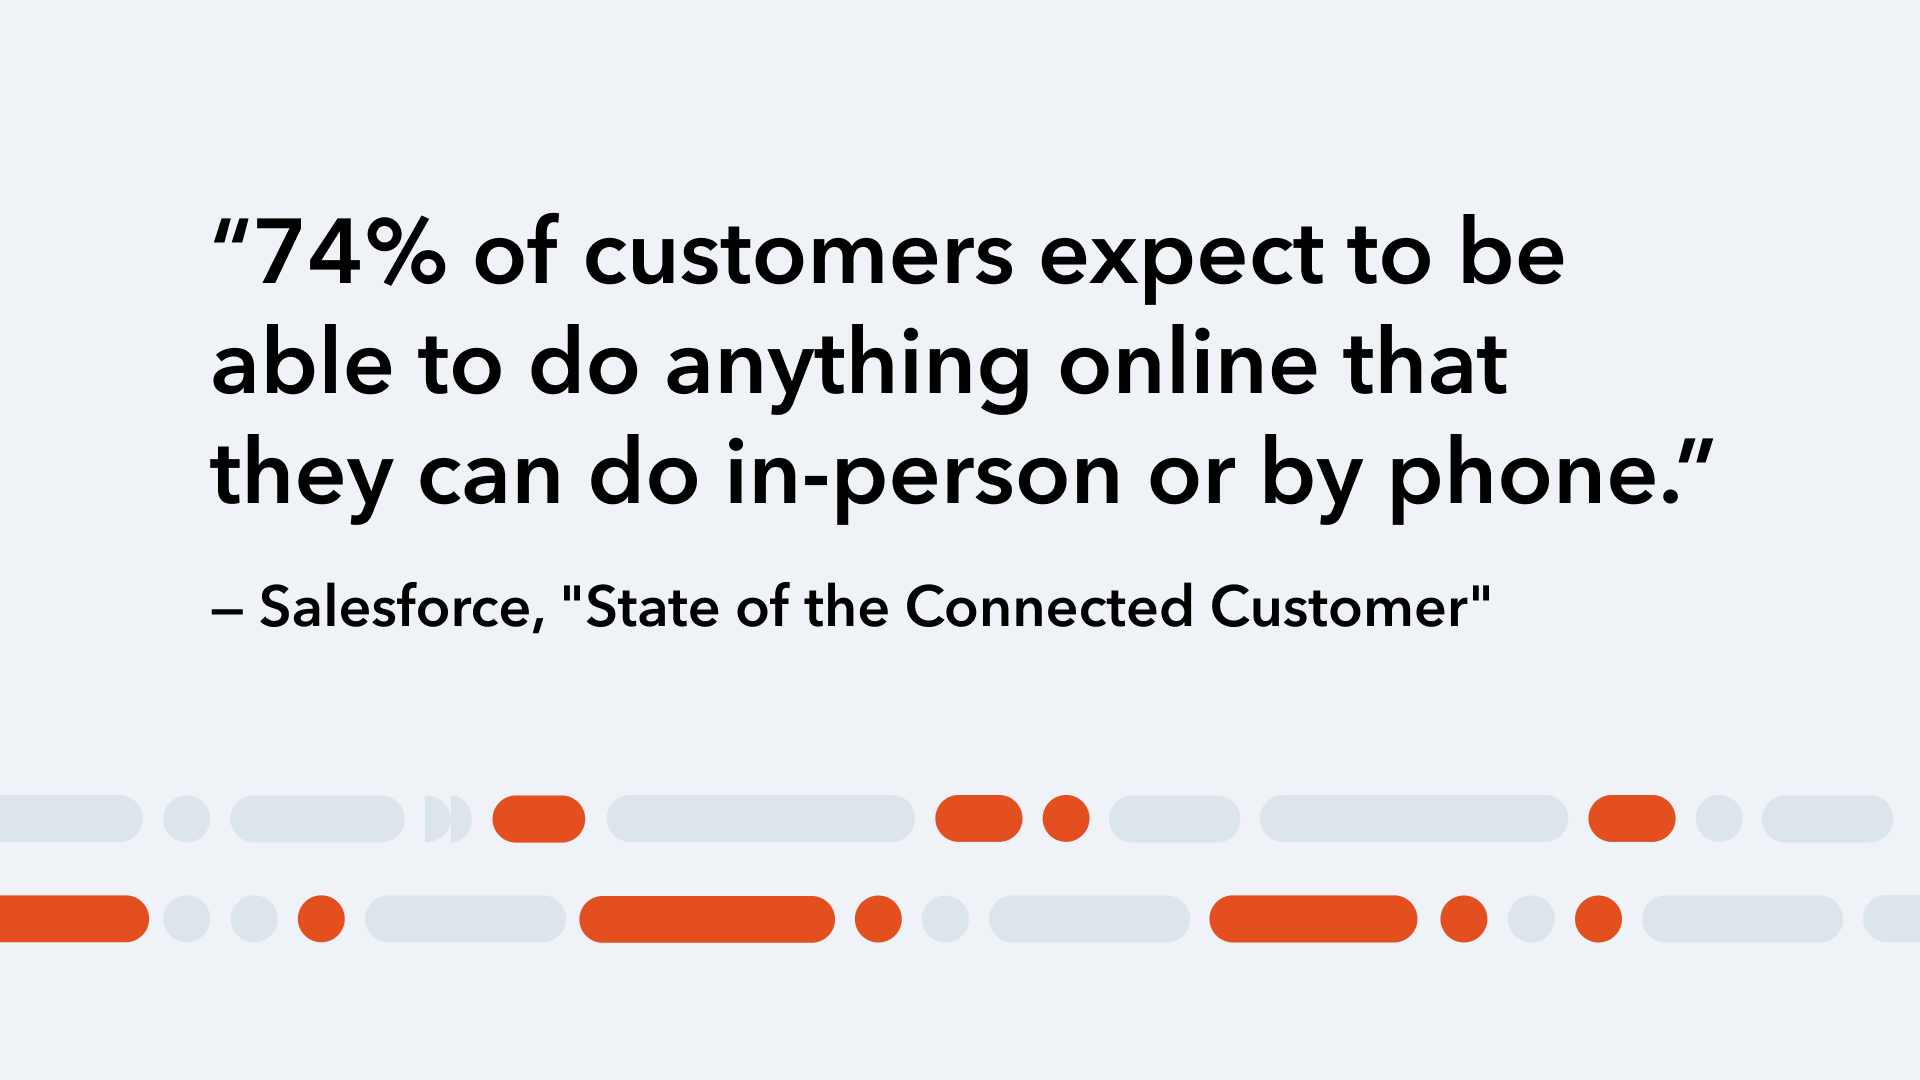 Salesforce found that “74% of customers expect to be able to do anything online that they can do in-person or by phone.” 